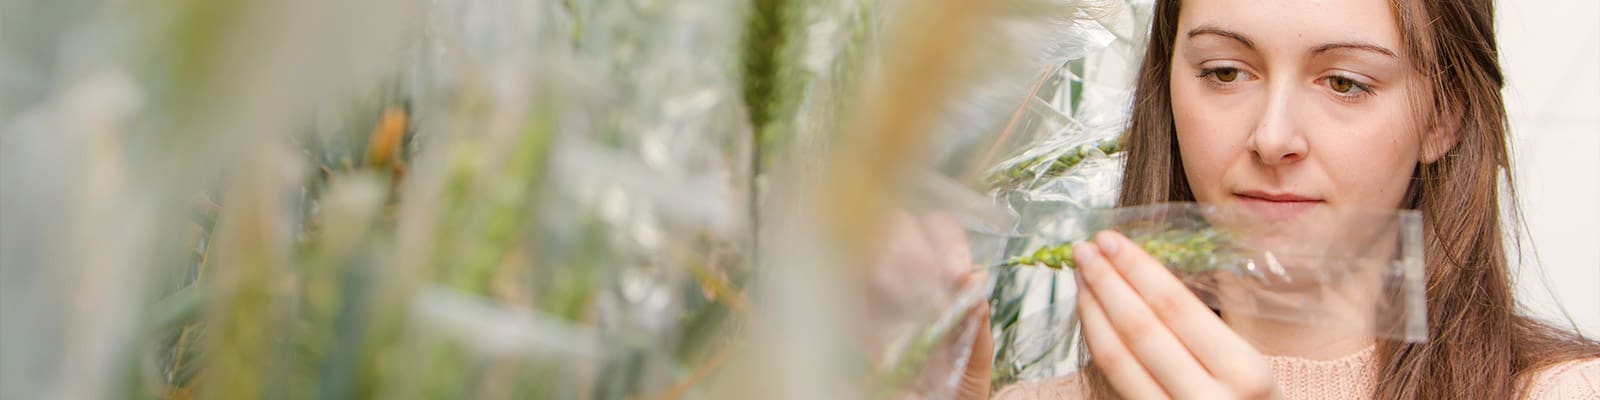 A student examines a growing plant